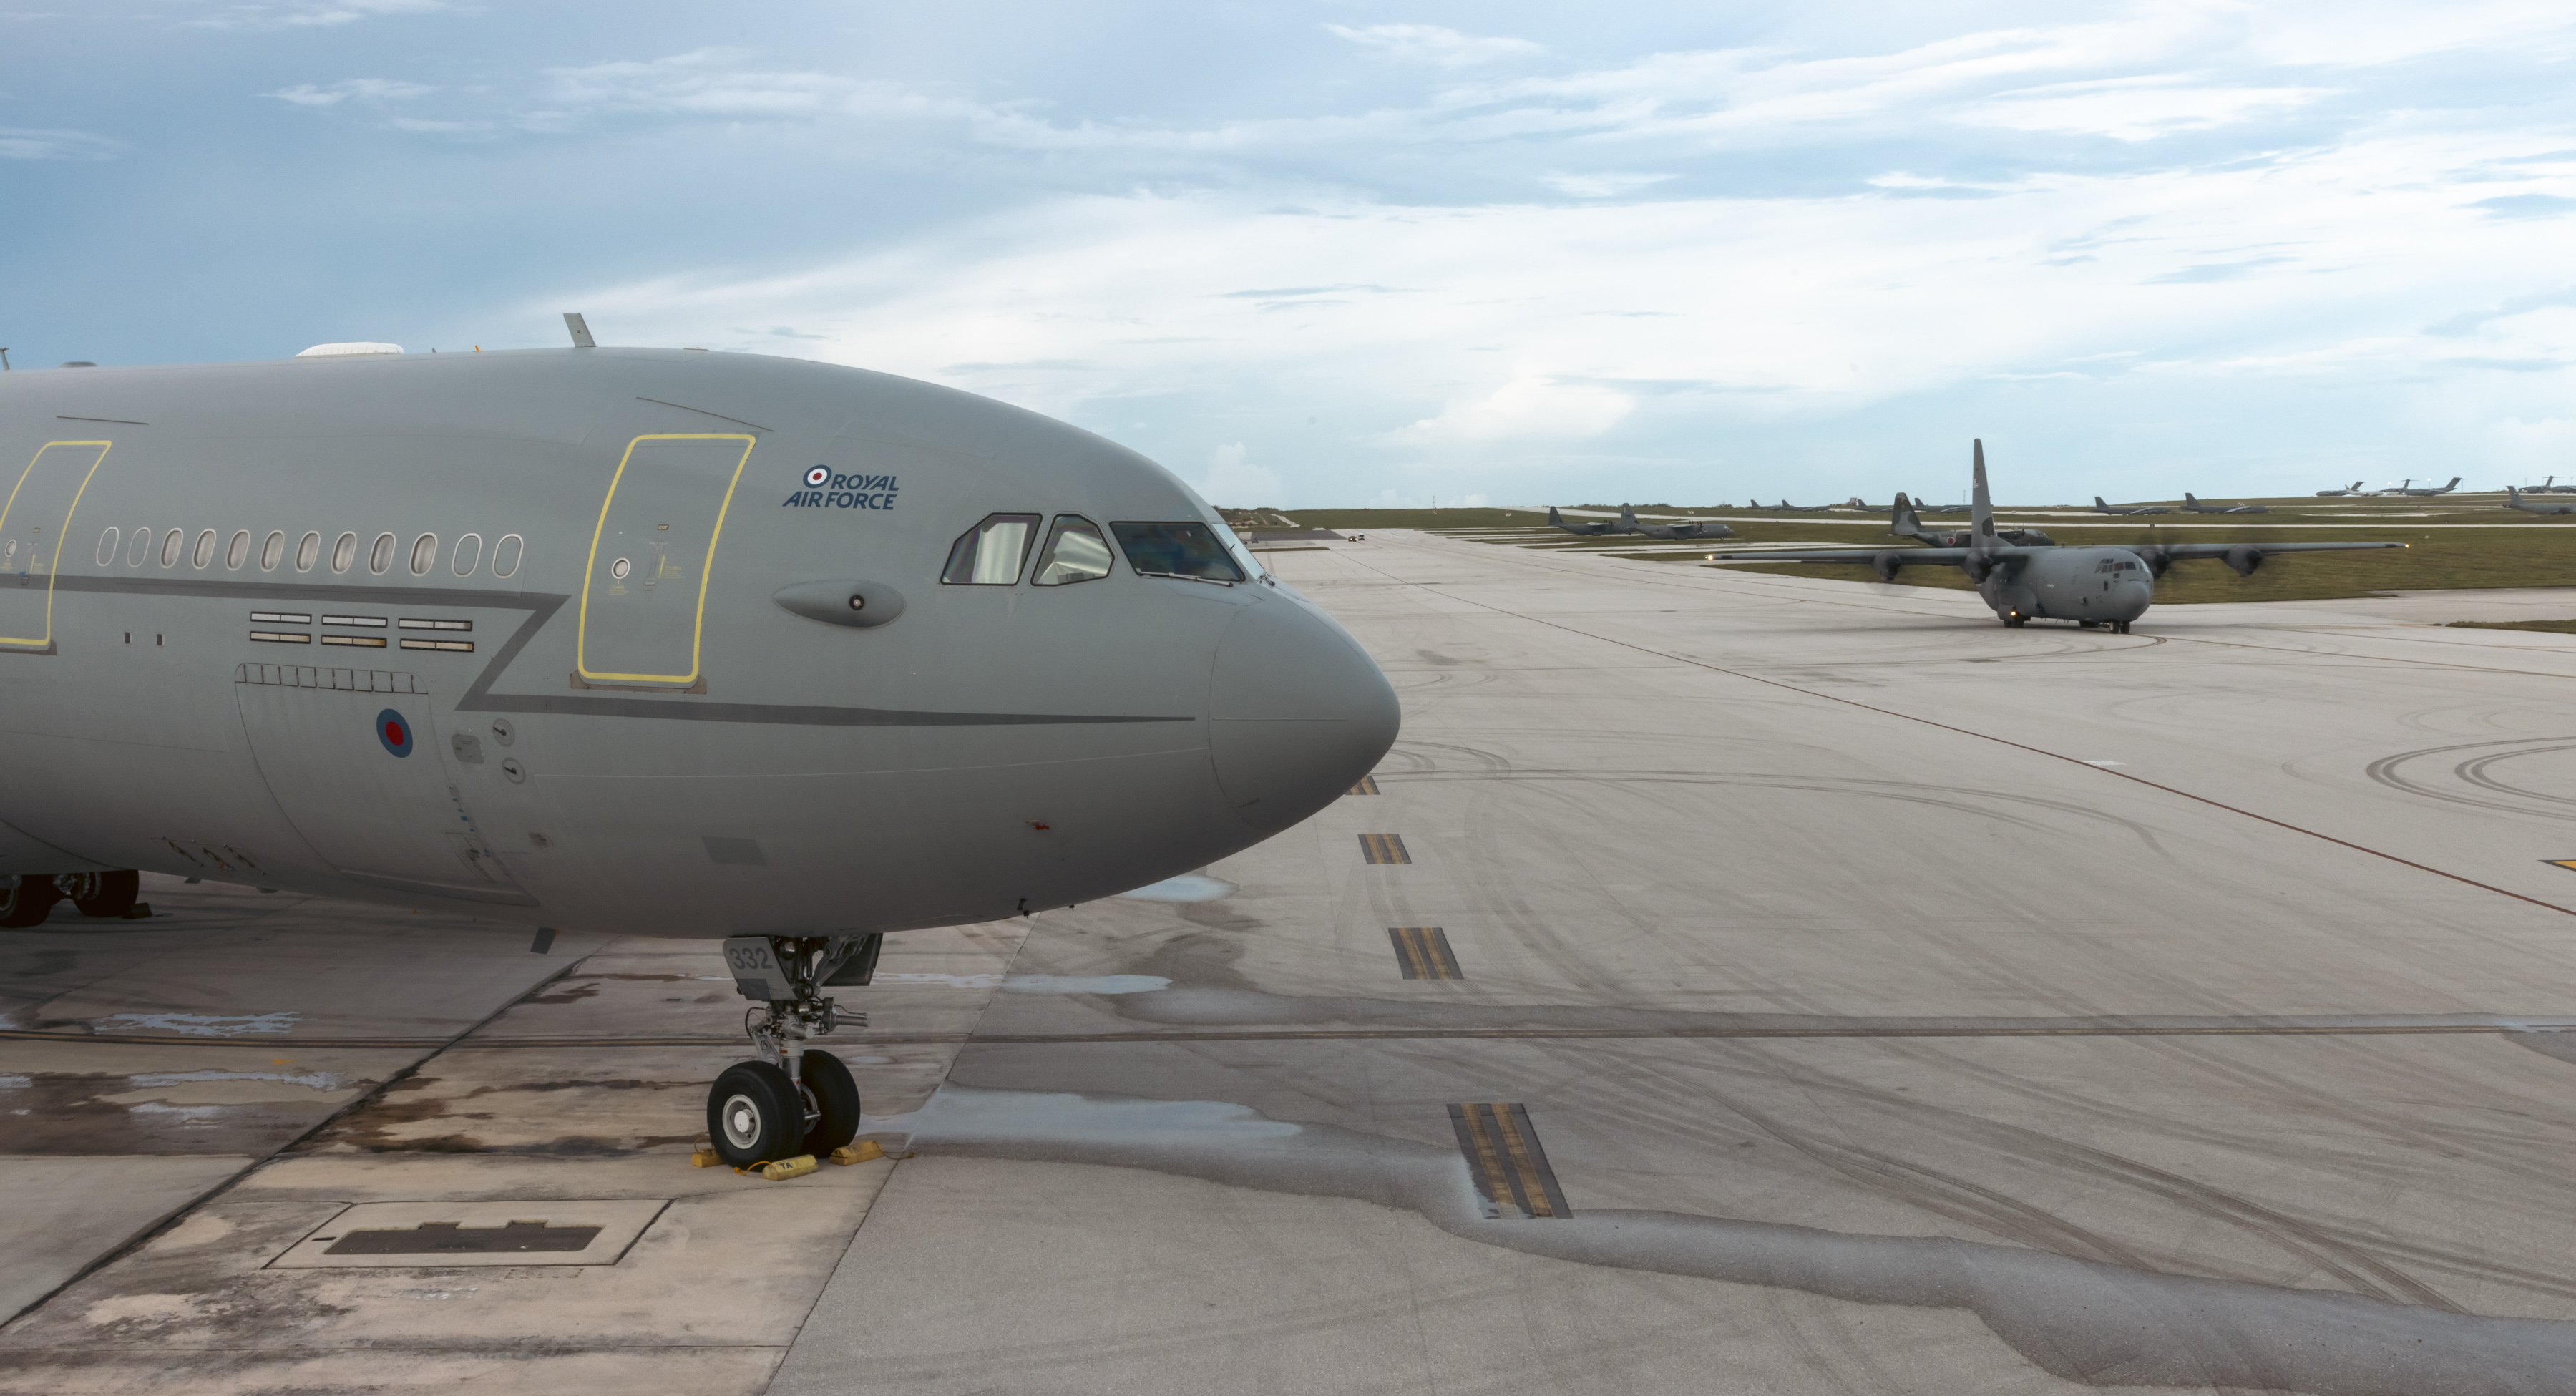 RAF Voyager aircraft on the runway